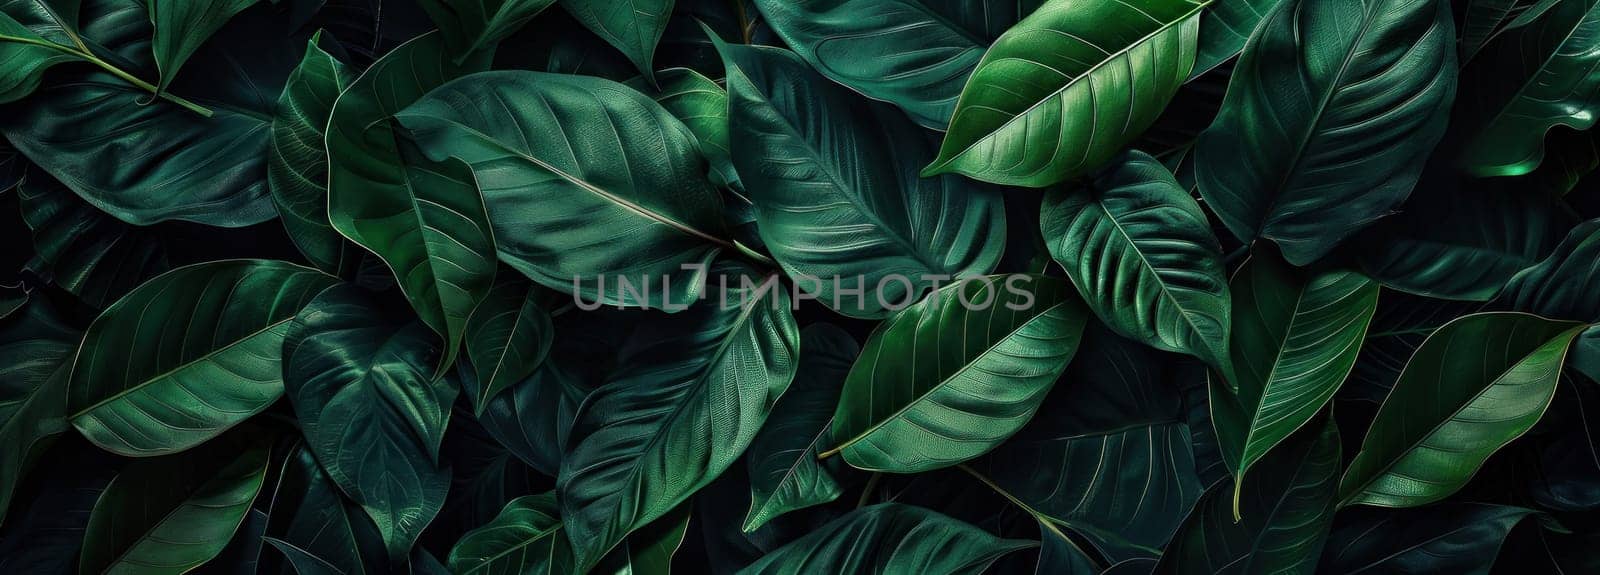 Close up view of lush green leaves on dark background with black wall, nature beauty and peaceful vibes